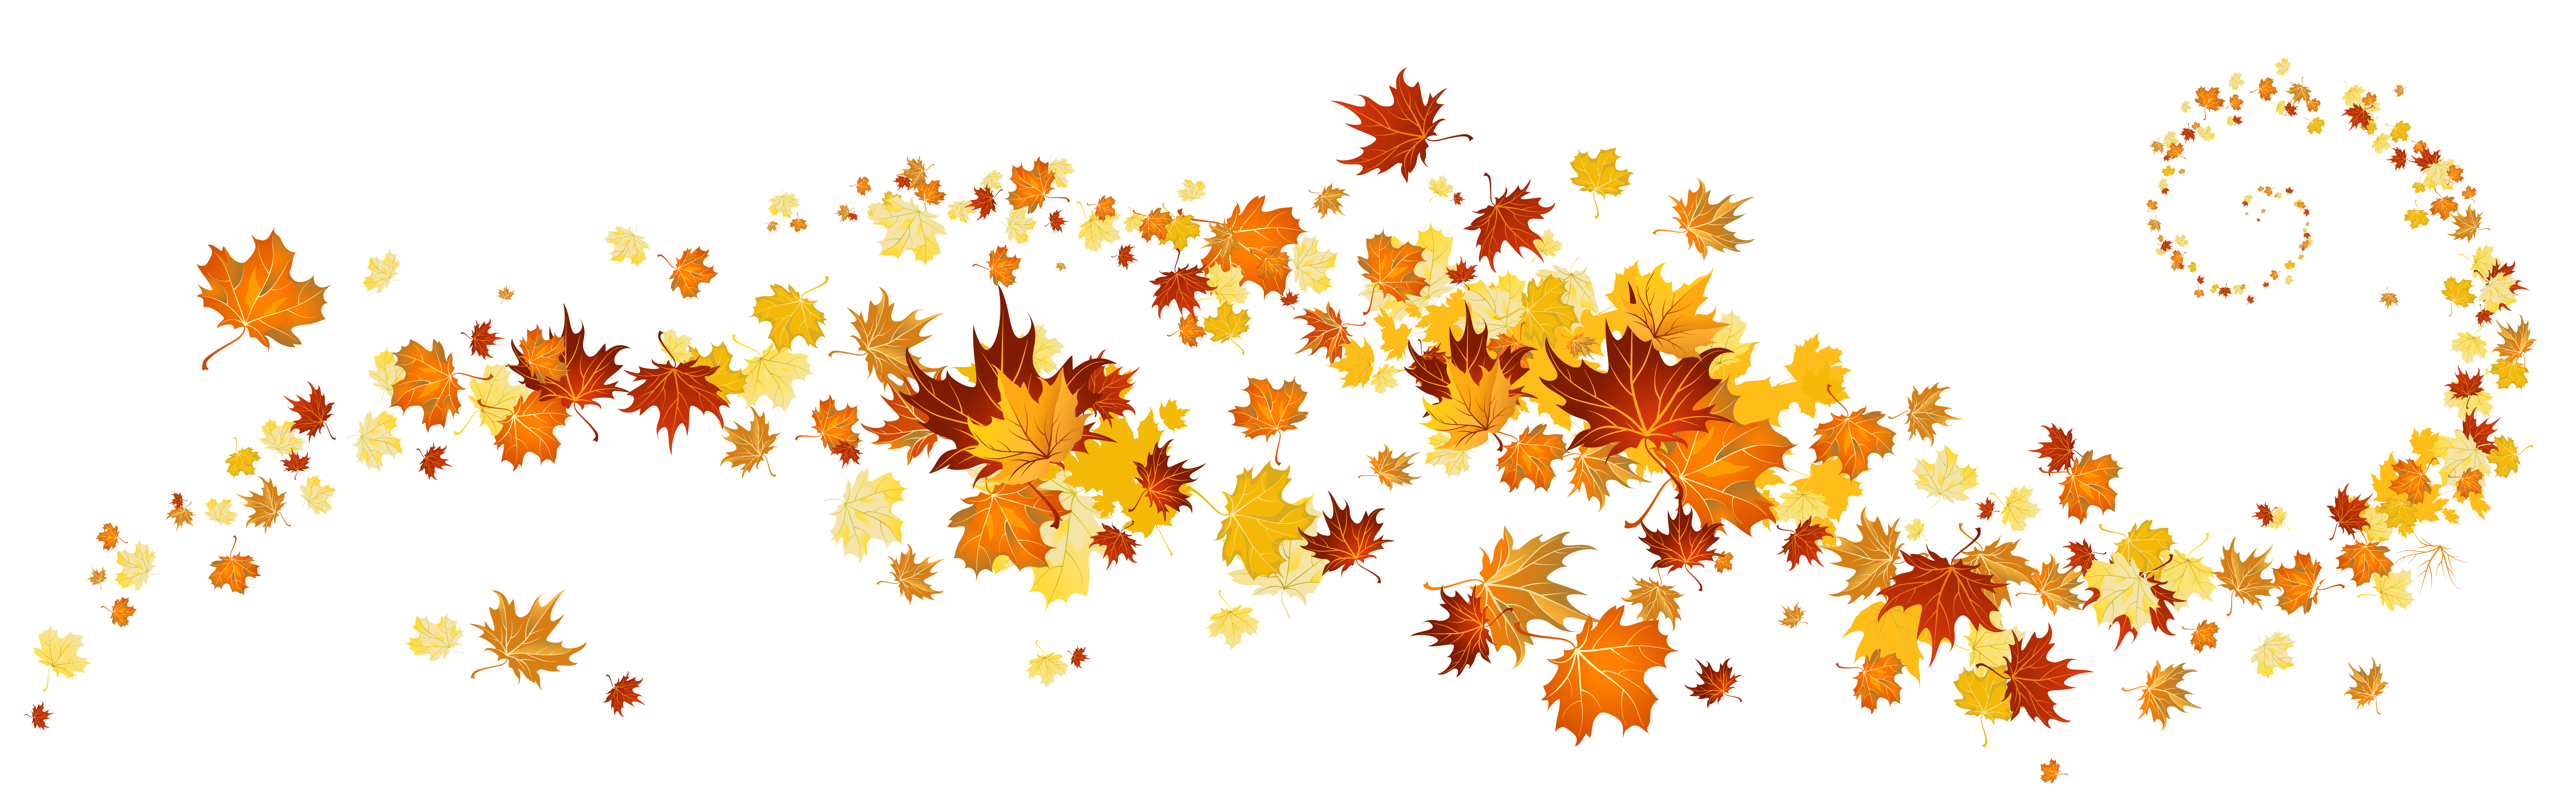 Autumn fall leaves fall leaf clip art outline free clipart images